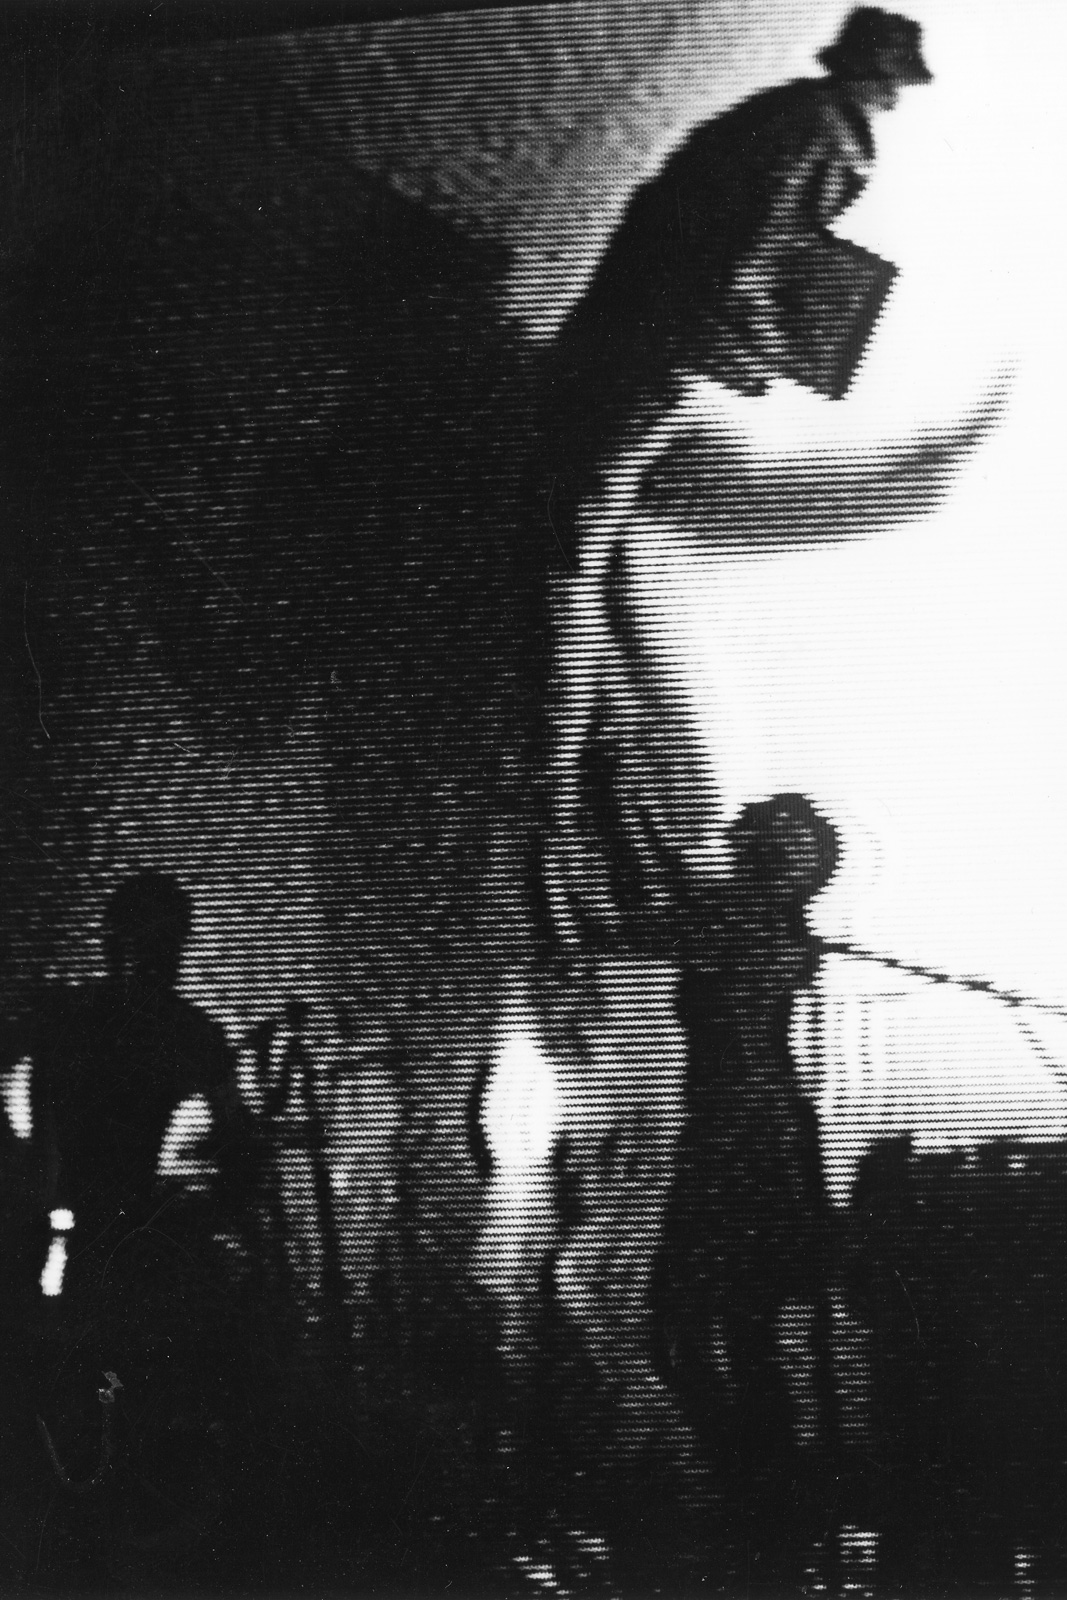 Personal Effects performing at "This Is It" show at Community Playhouse in 1984. Video still by Duane Sherwood.